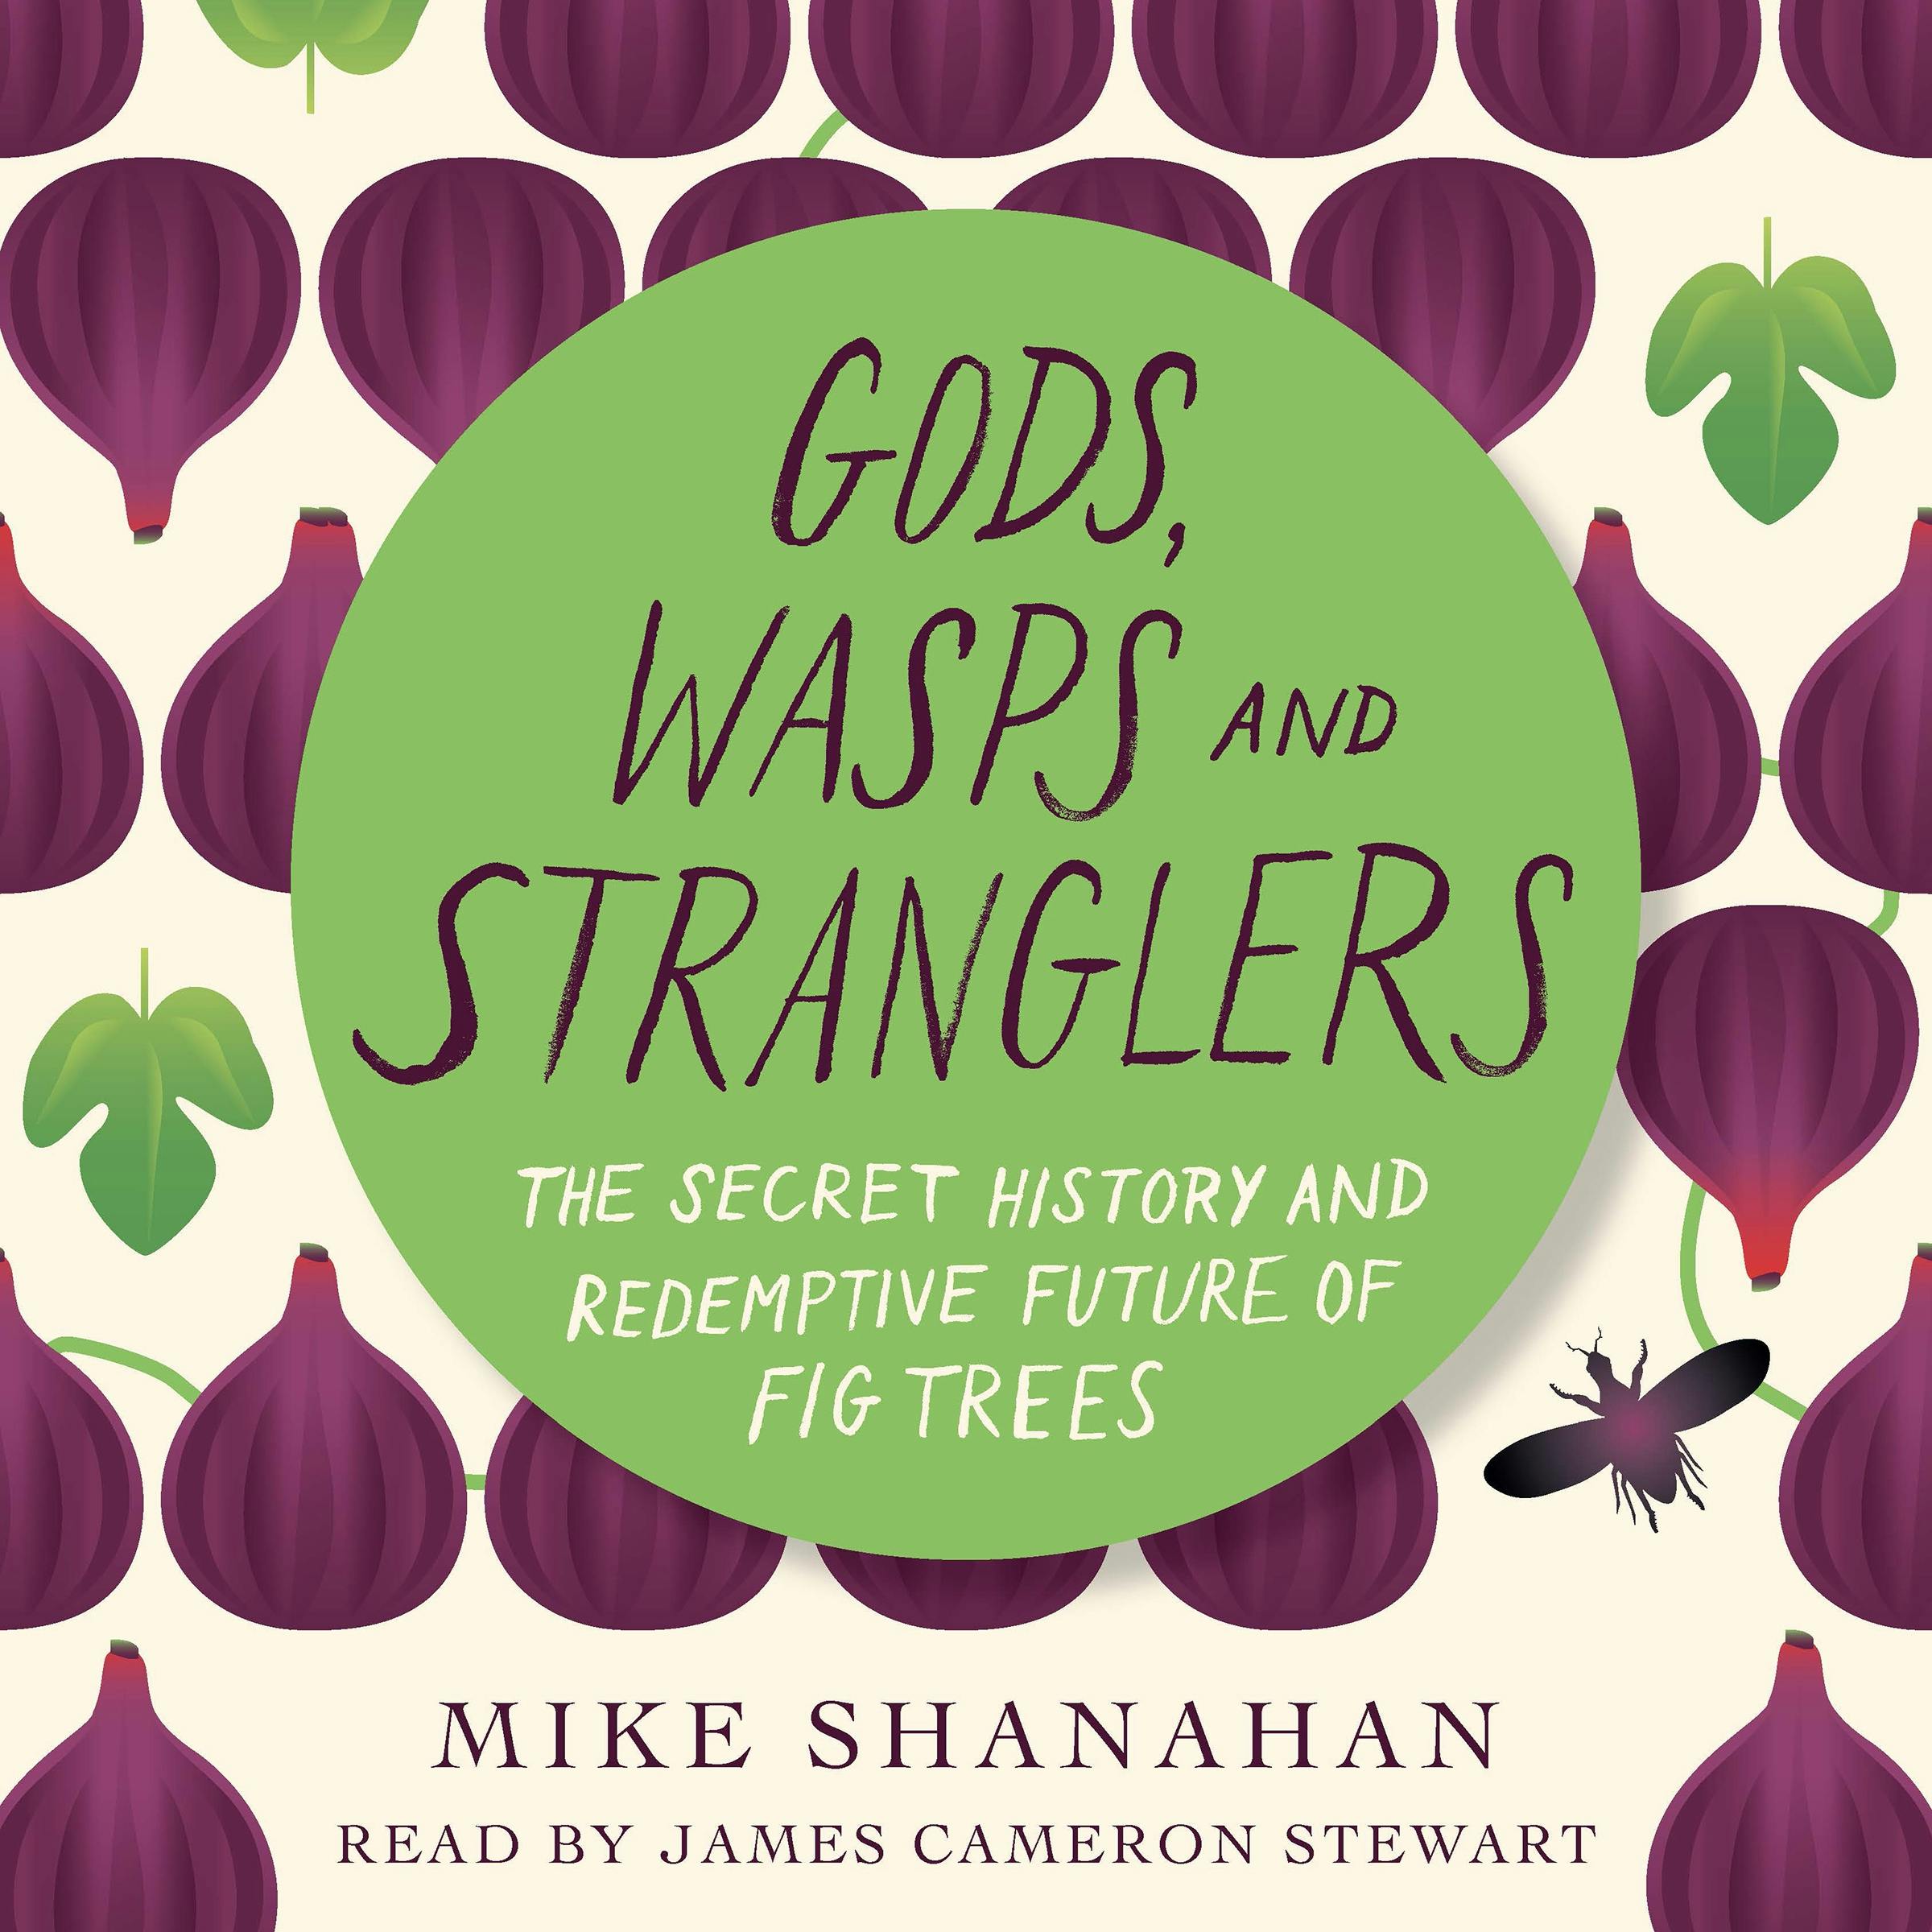 Gods, Wasps and Stranglers: The Secret History and Redemptive Future of Fig Trees - Mike Shanahan